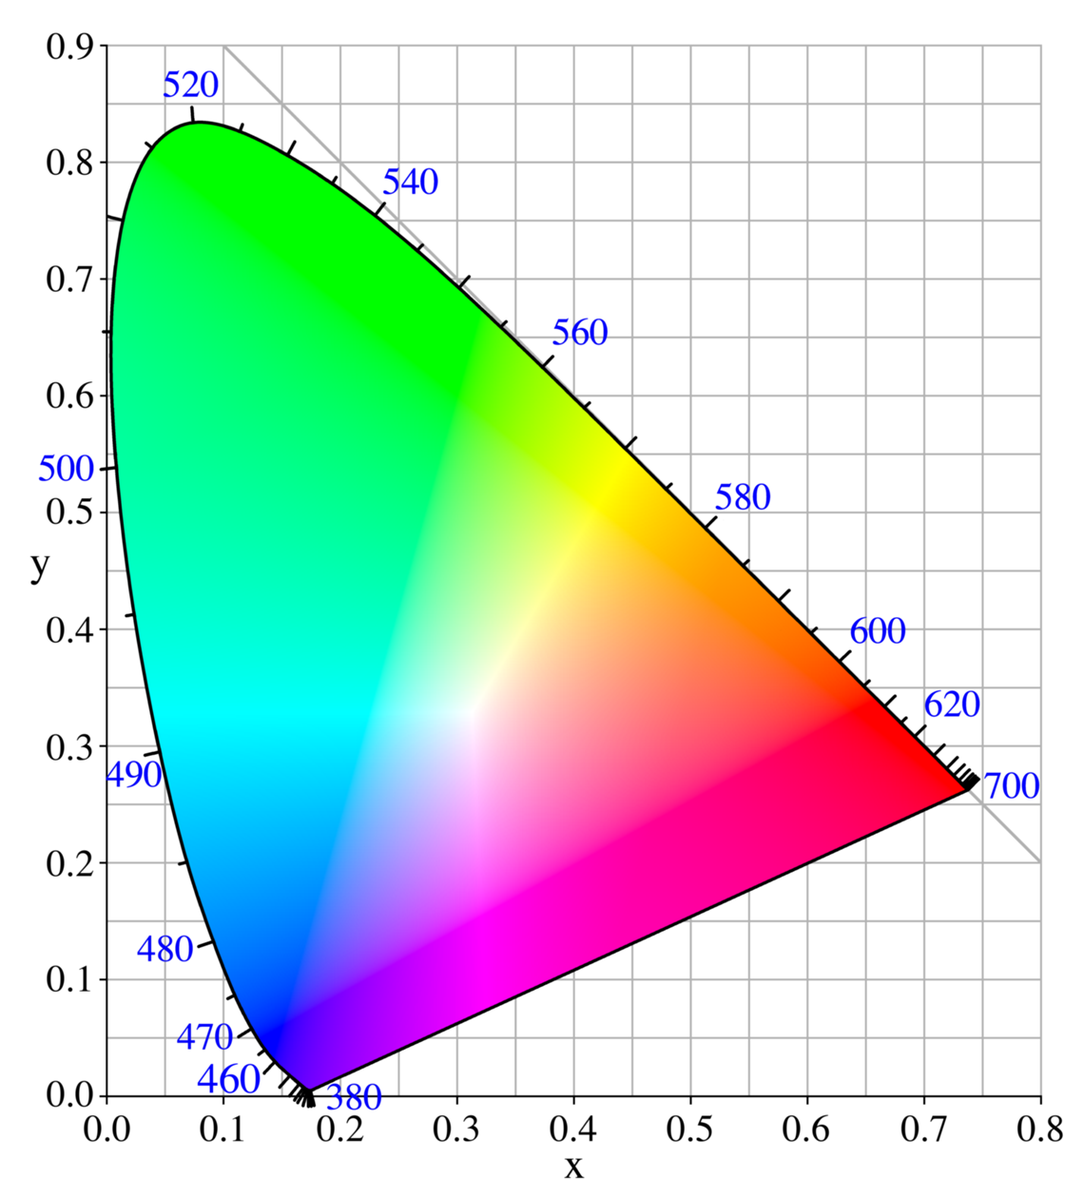 Graph of CIE color space, a tall curve from violet to red with purple along the bottom, and white in the center